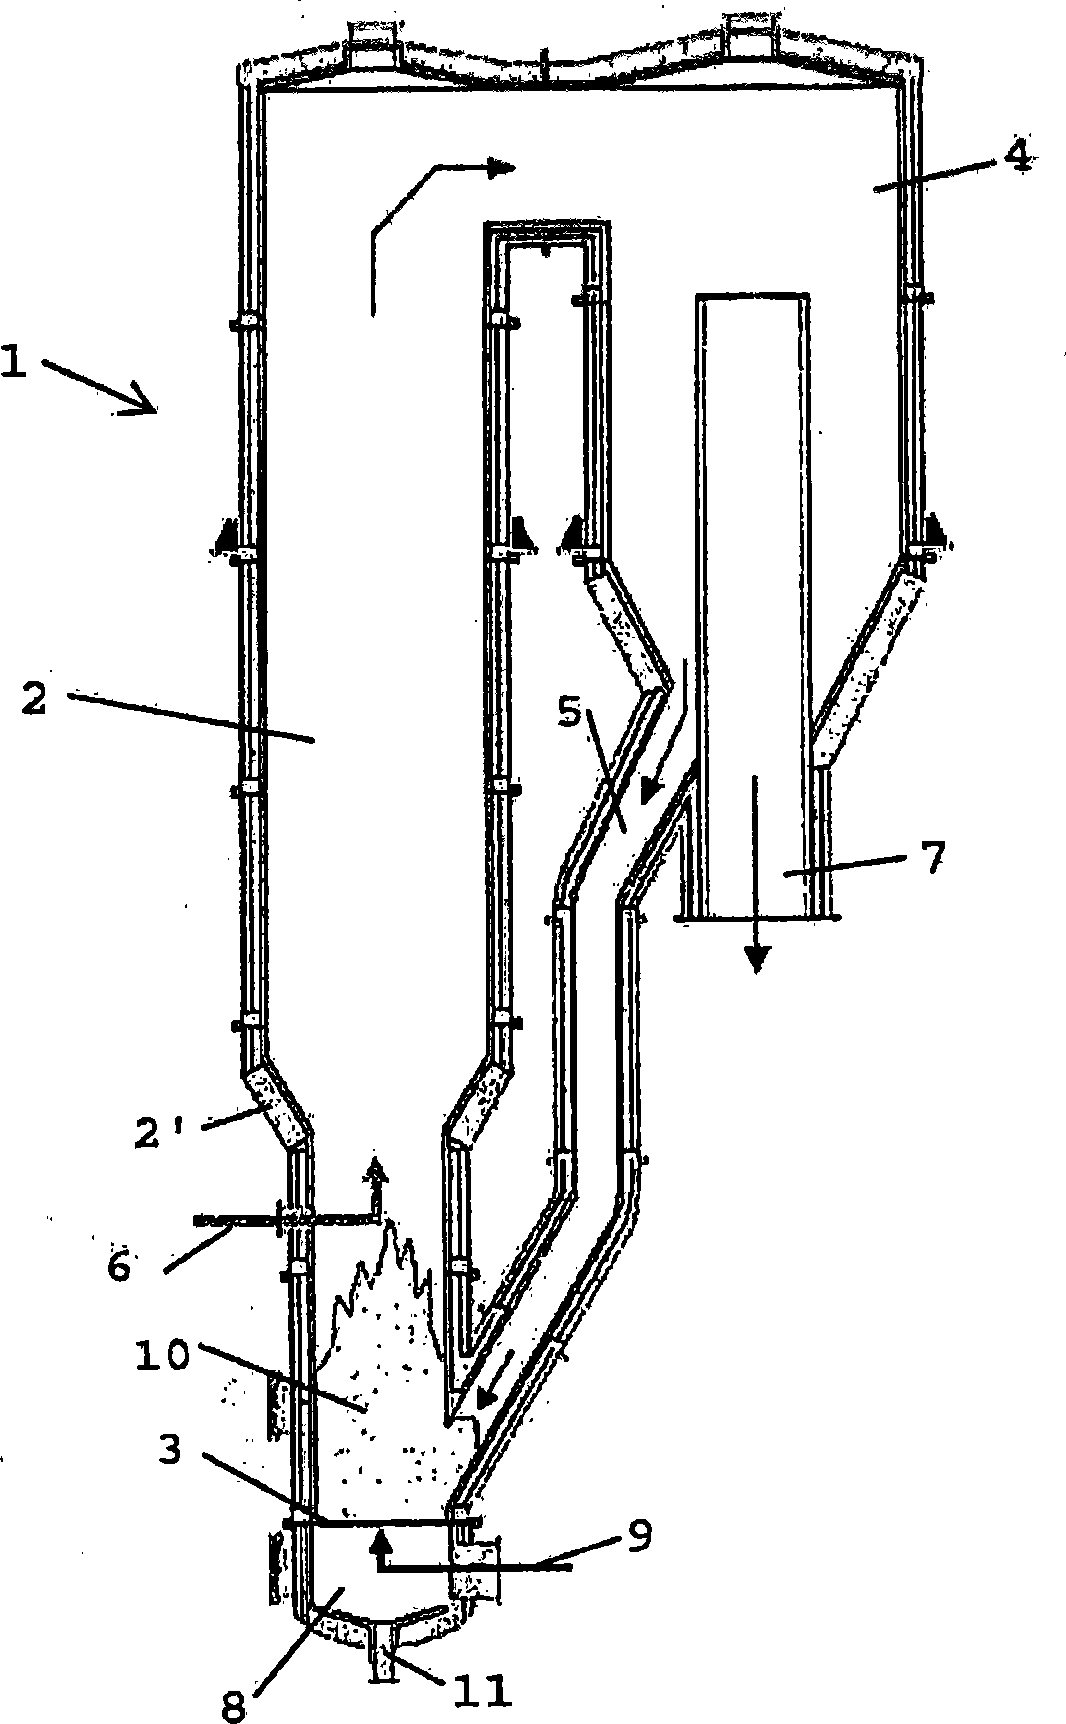 Grid for fluidized bed gasifier